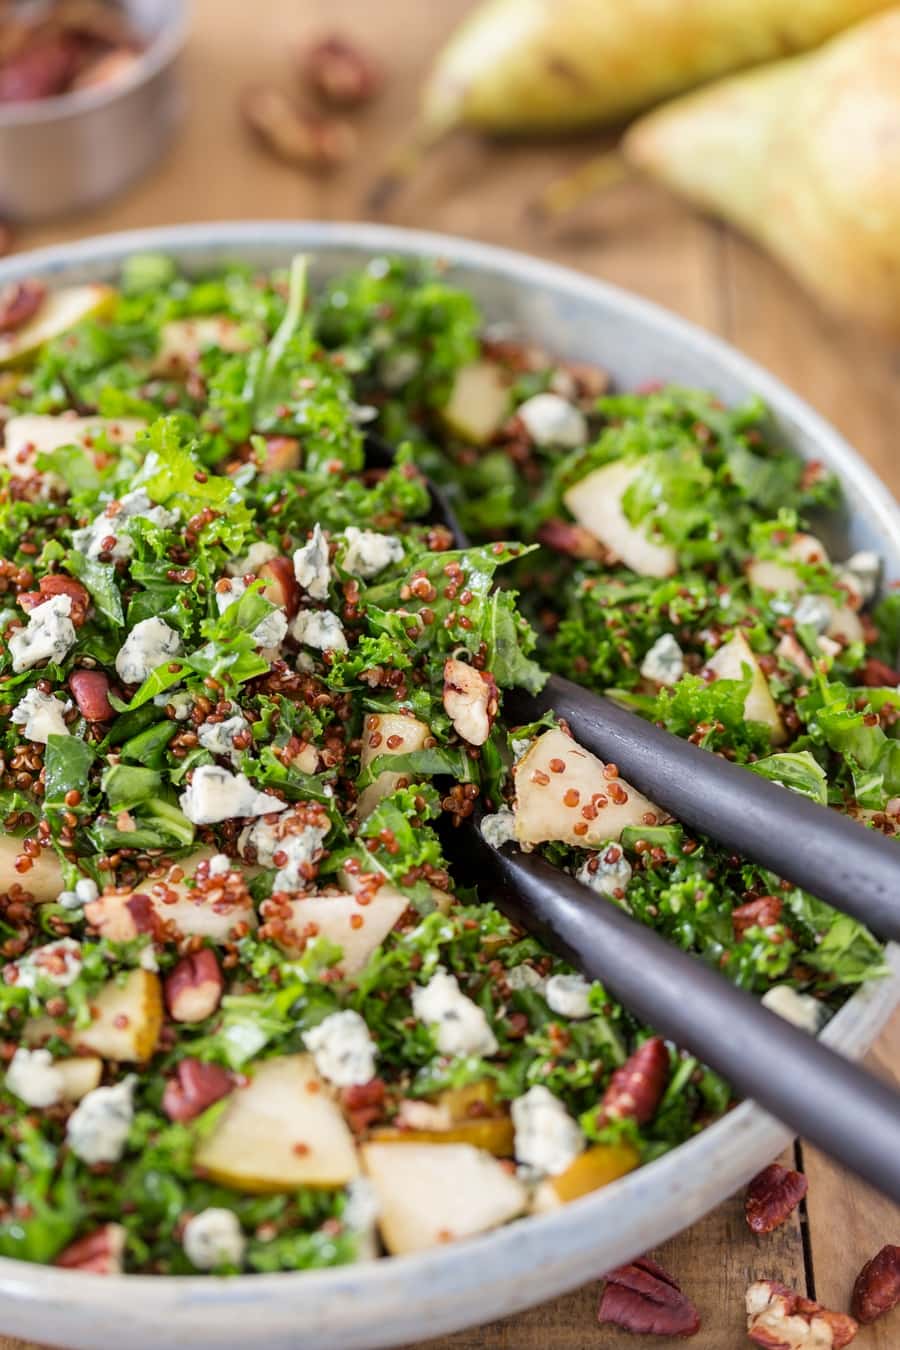 Kale salad with pear and blue cheese.